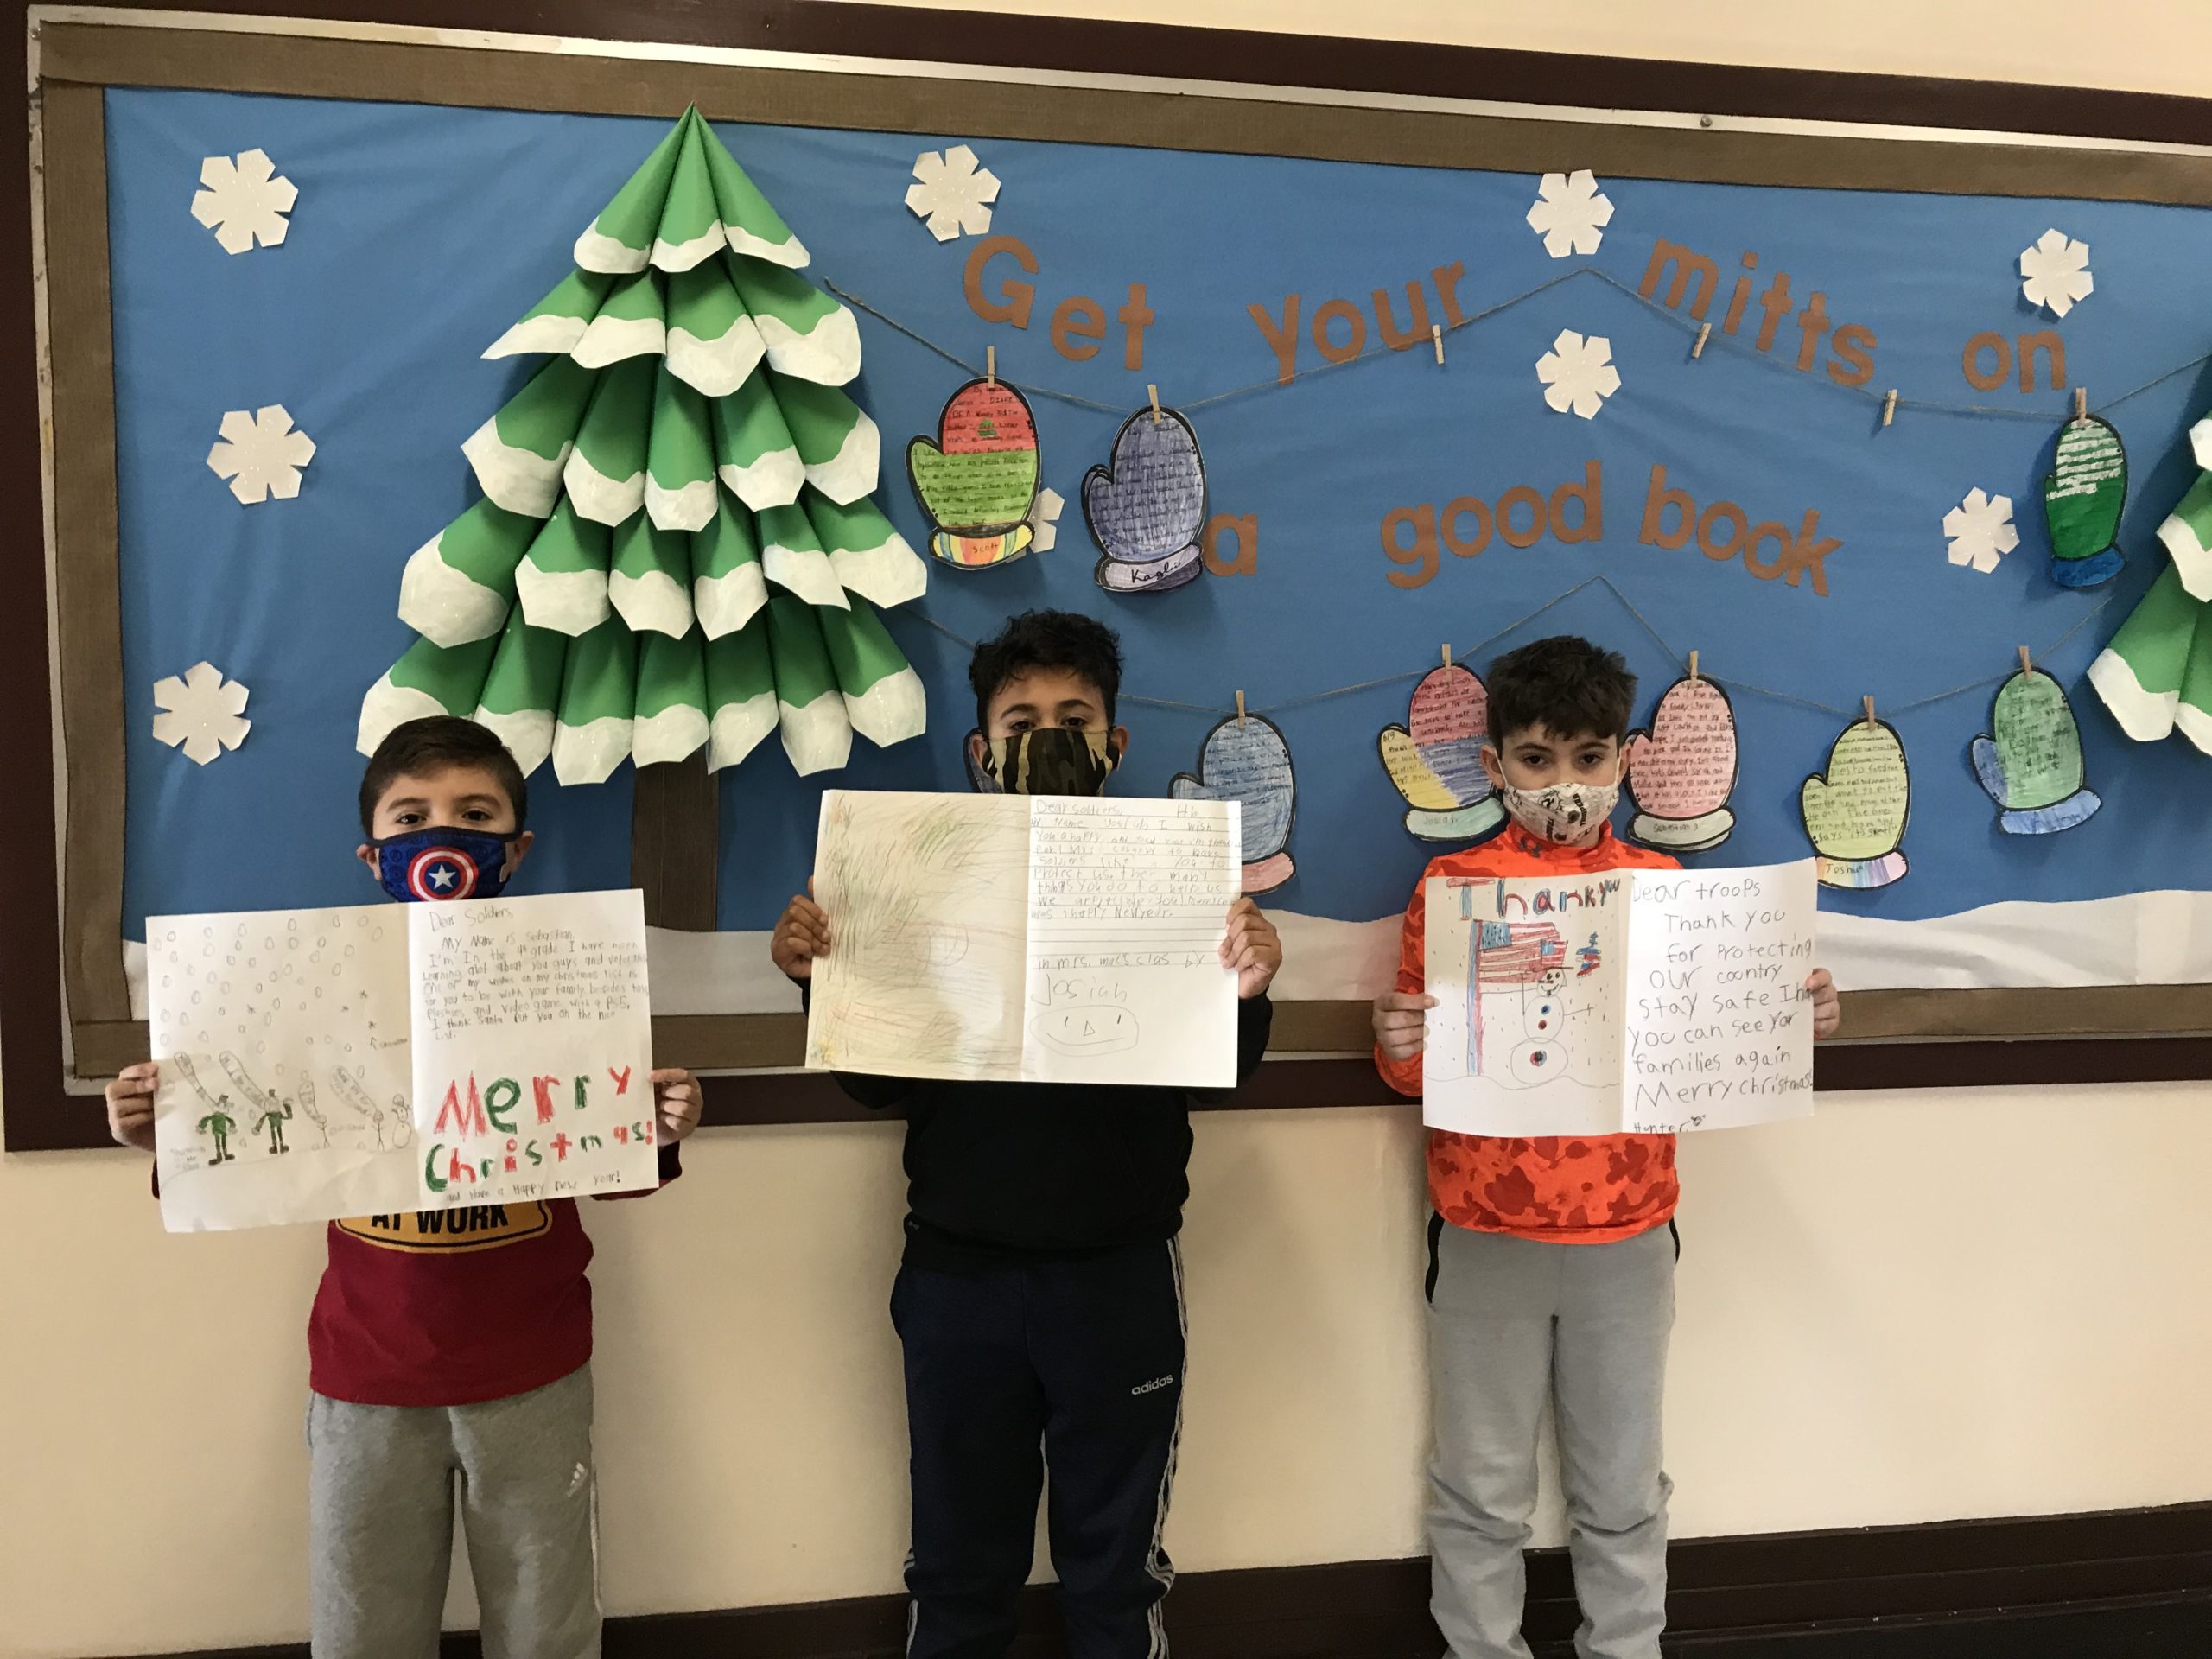 To bring some cheer to those who are serving or have served the country, fourth grade students at Hampton Bays Elementary School recently spent time making holiday cards for local veterans and troops serving overseas. The colorful cards will be sent to the Northport VA Medical Center and the McChord Air Force Base in Tacoma, Washington for delivery. 